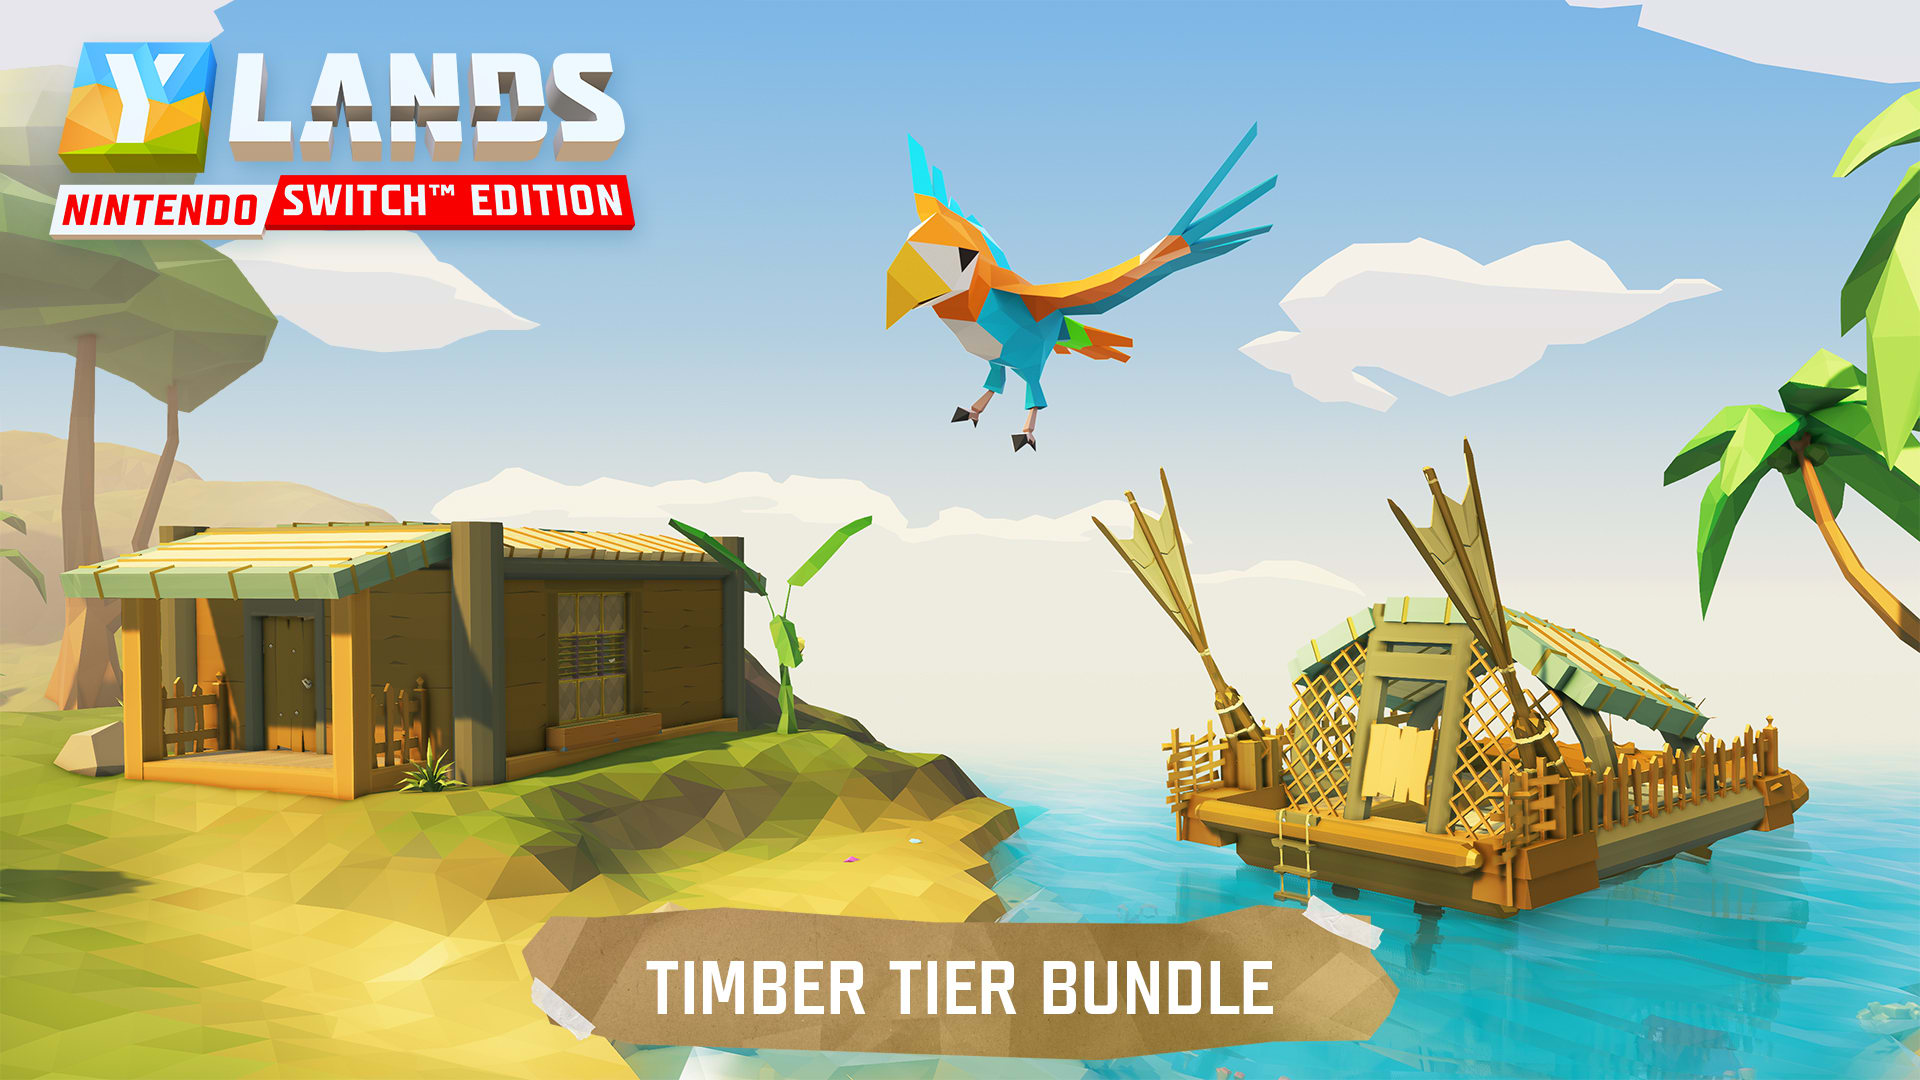 Ylands Nintendo Switch™ Edition - Timber Tier Bundle